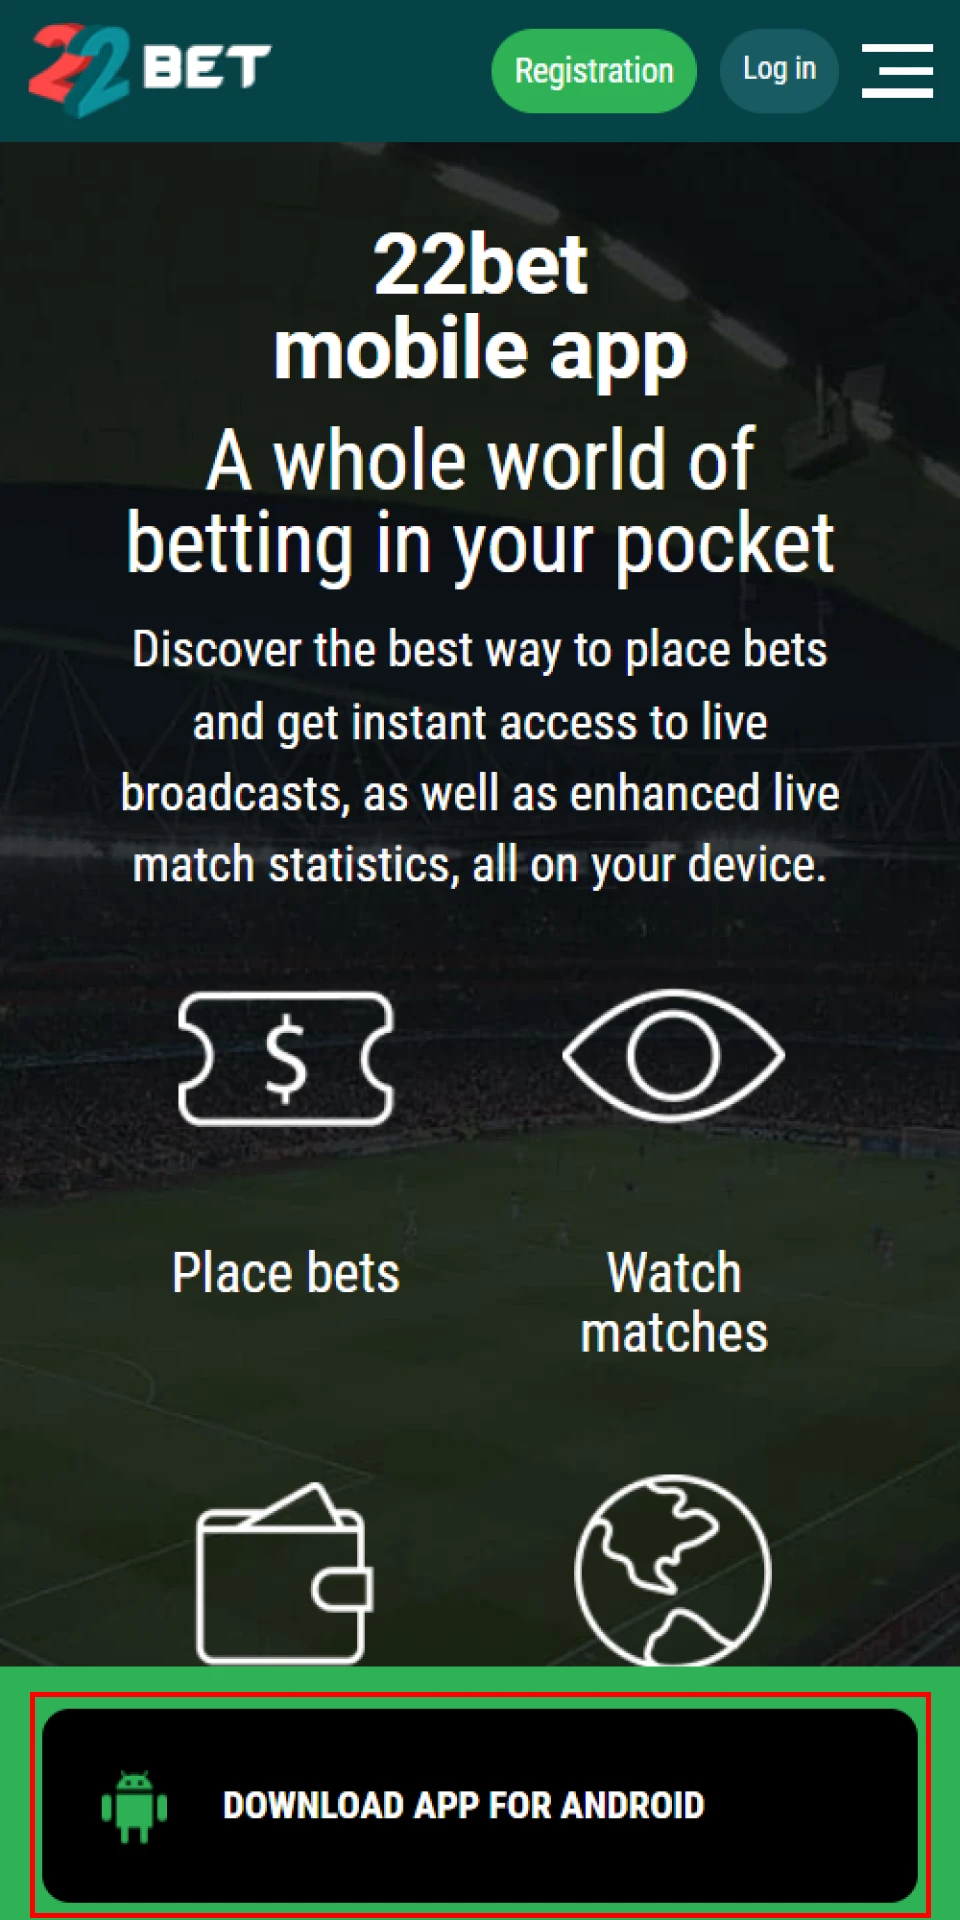 Download the 22bet Android app directly from their website.